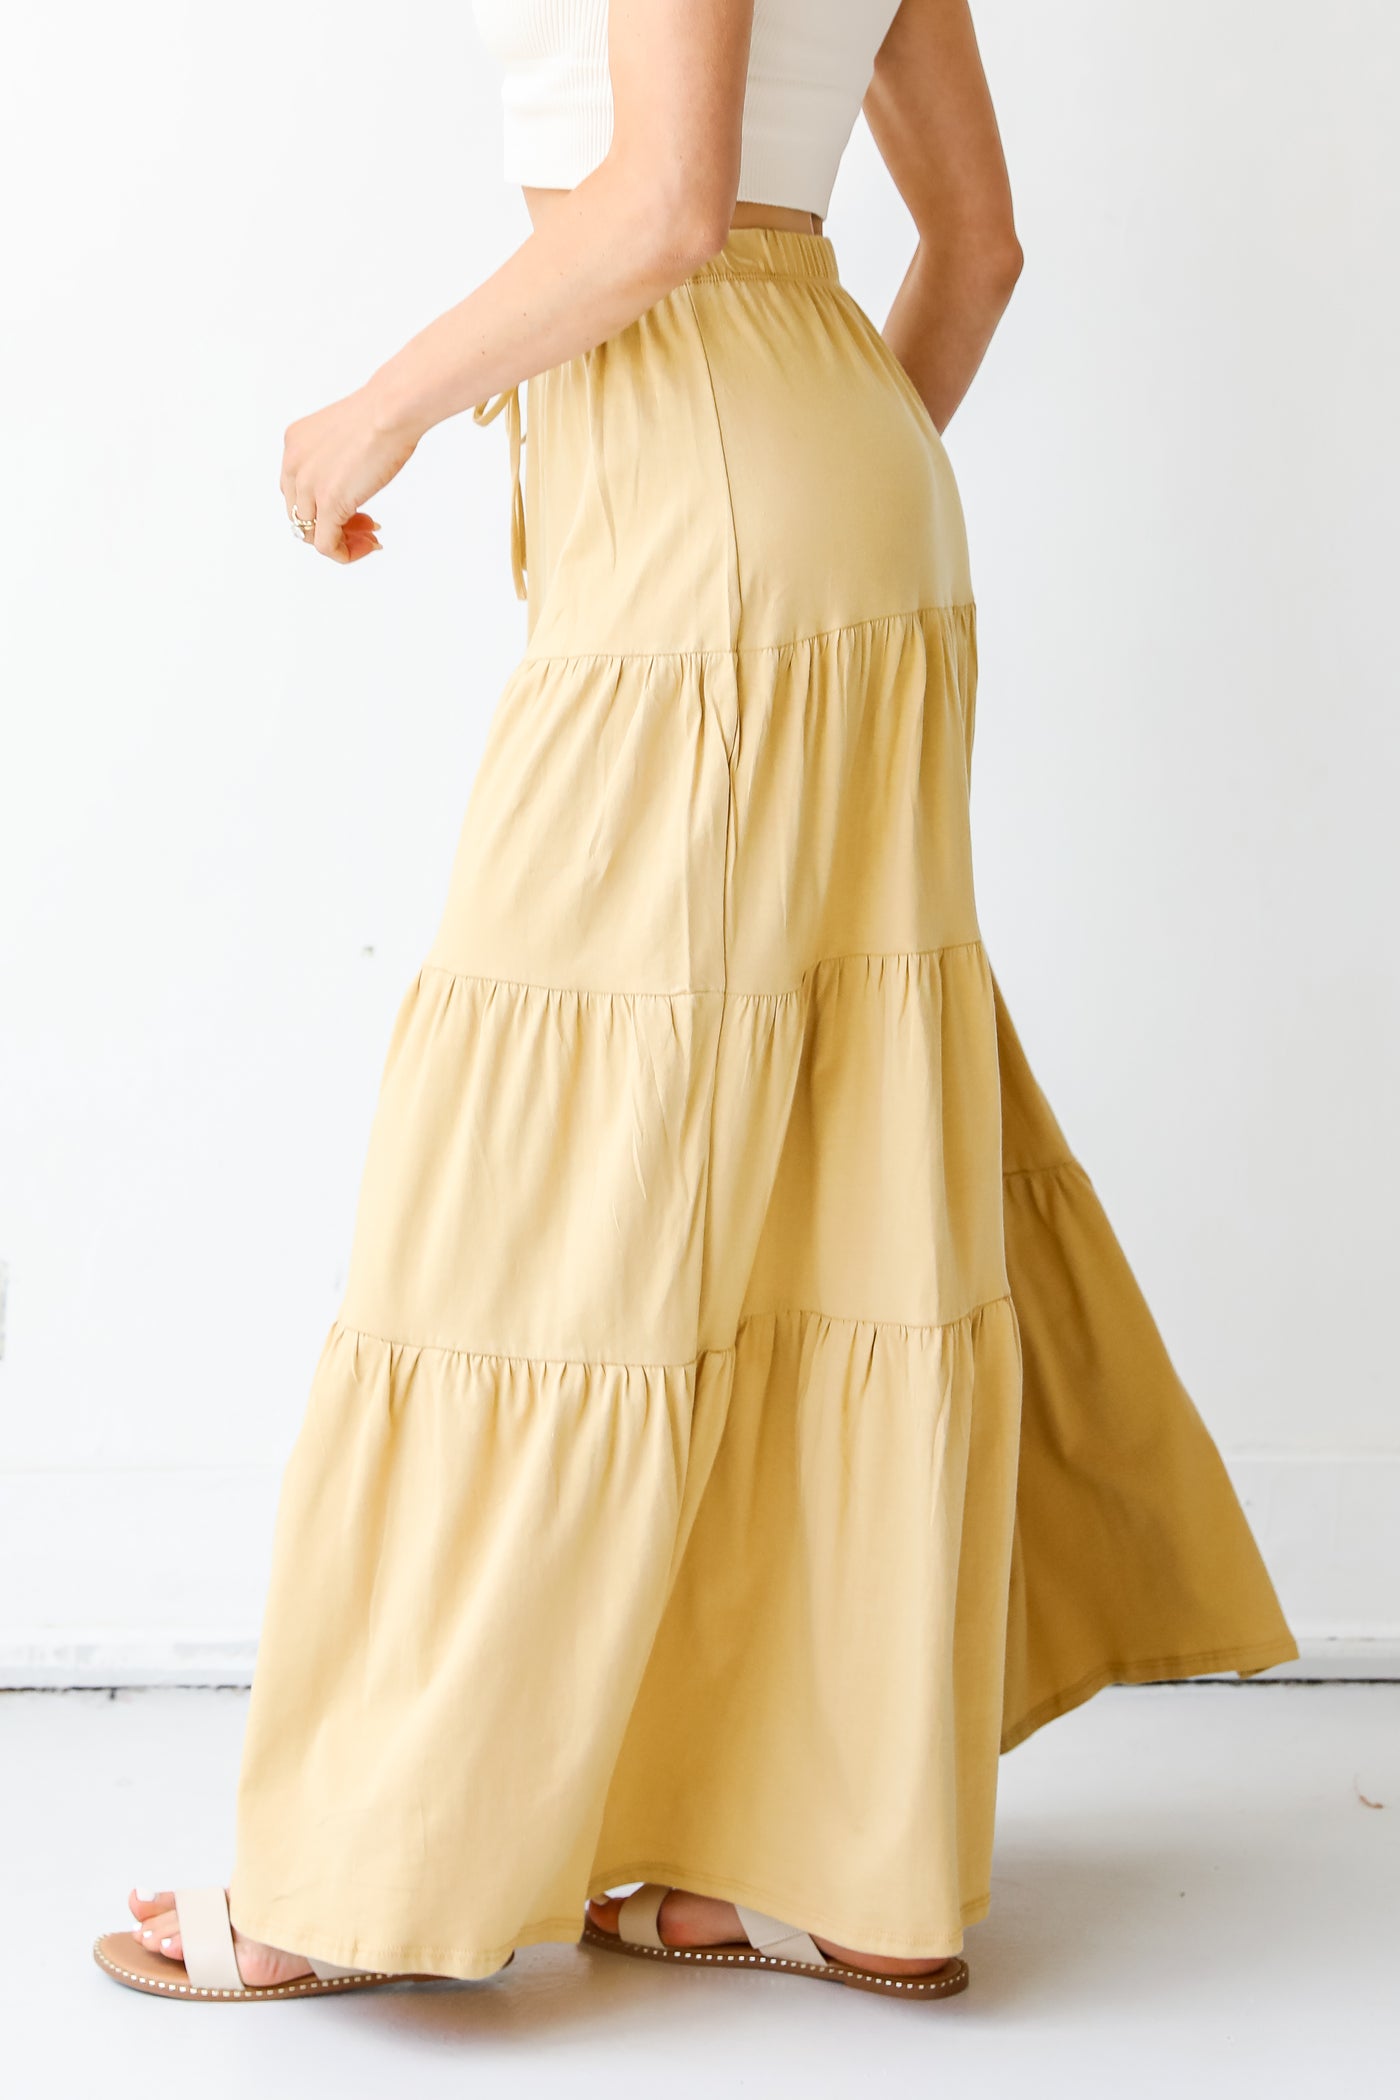 Tiered Maxi Skirt in yellow side view